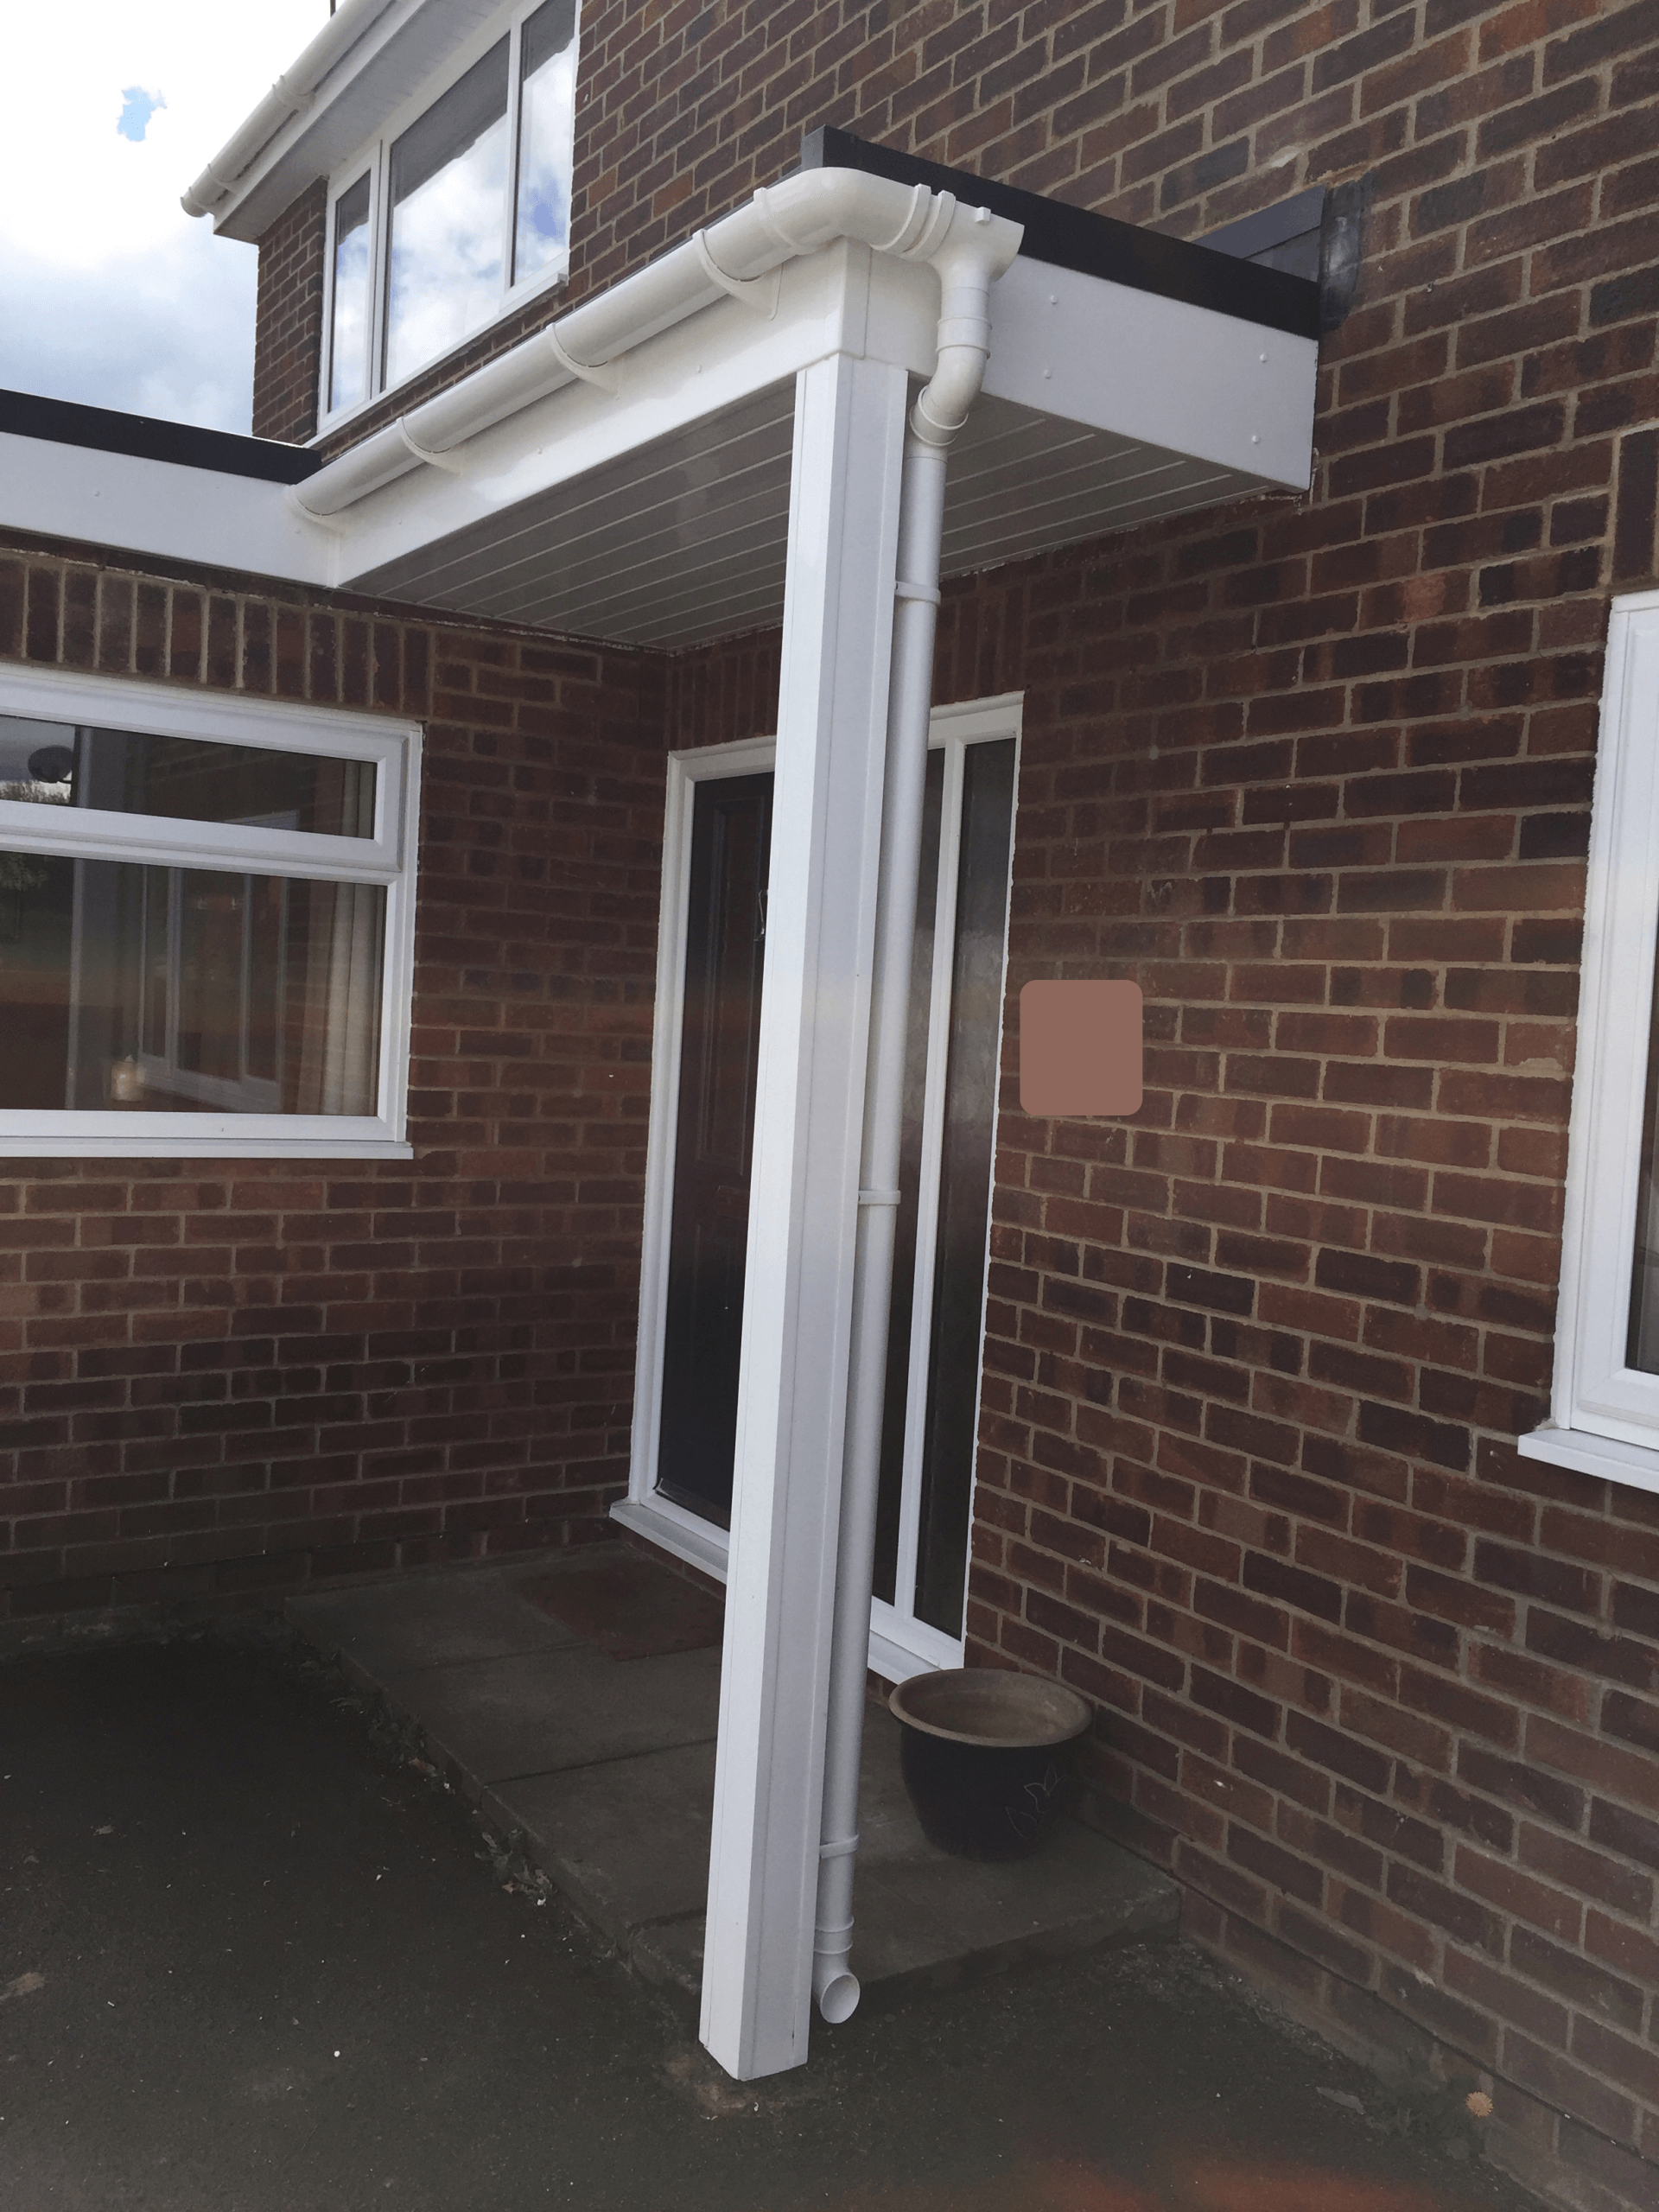 new guttering and downpipe on porch